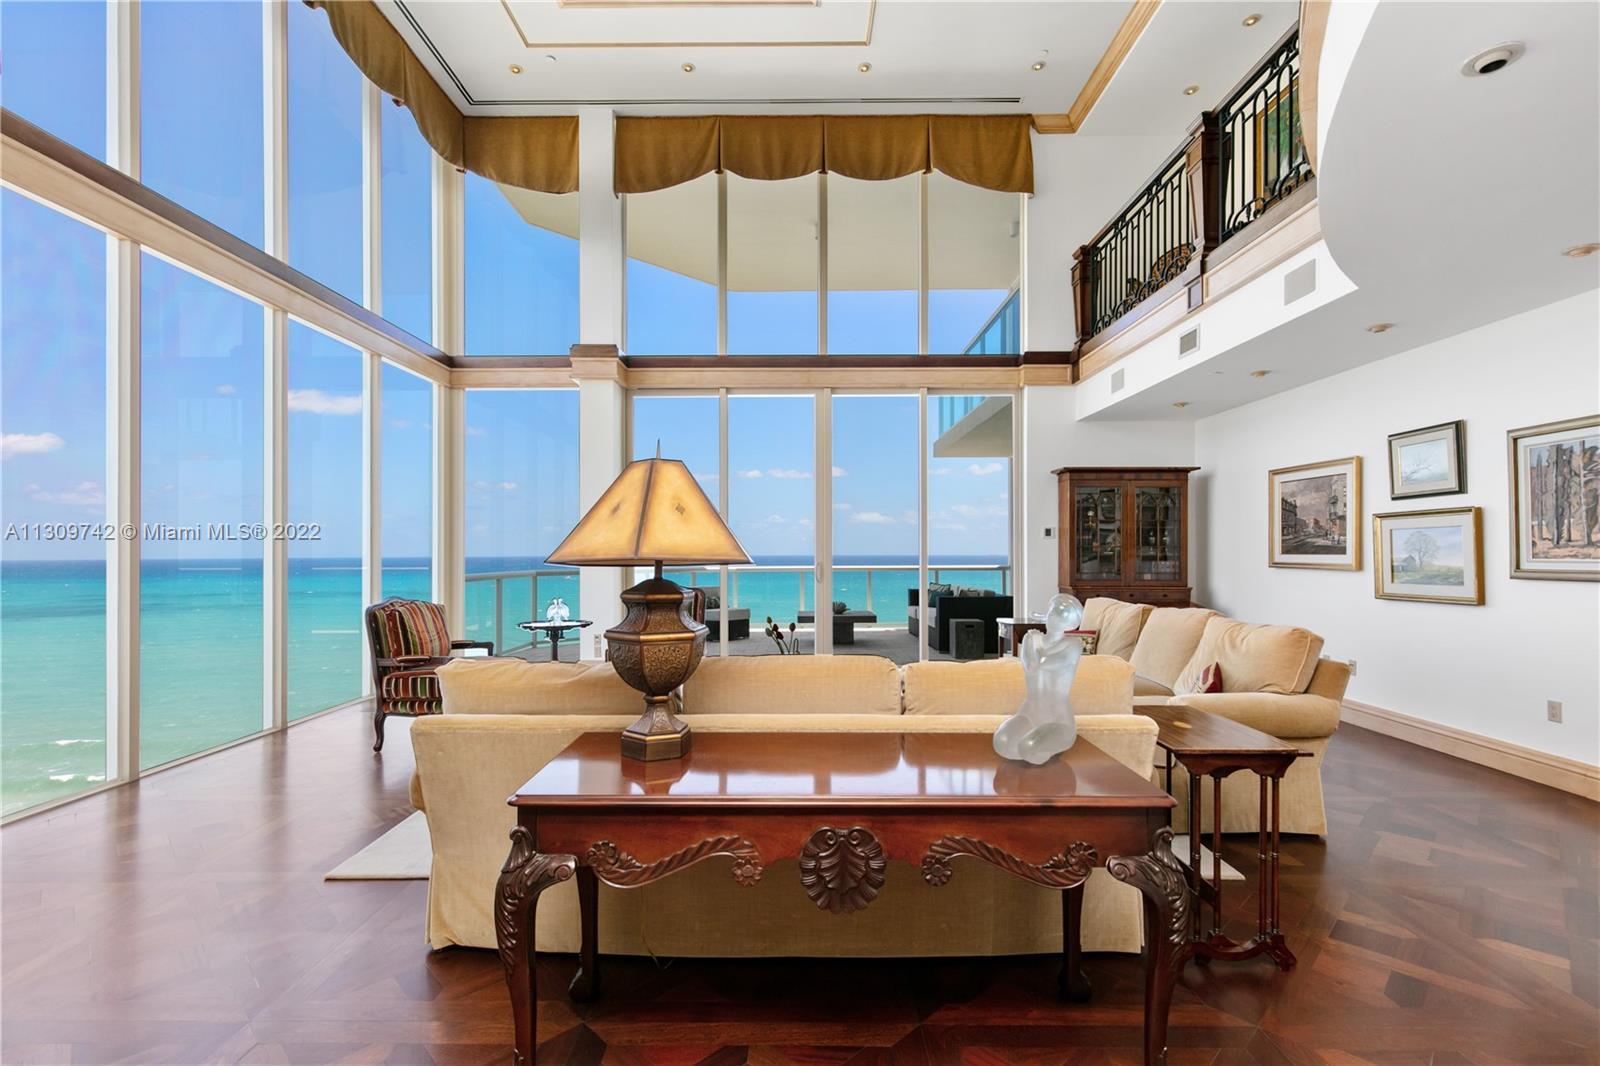 Magnificent 2-story, one-of-a-kind, beachfront penthouse unit located right on Hollywood Beach! Huge